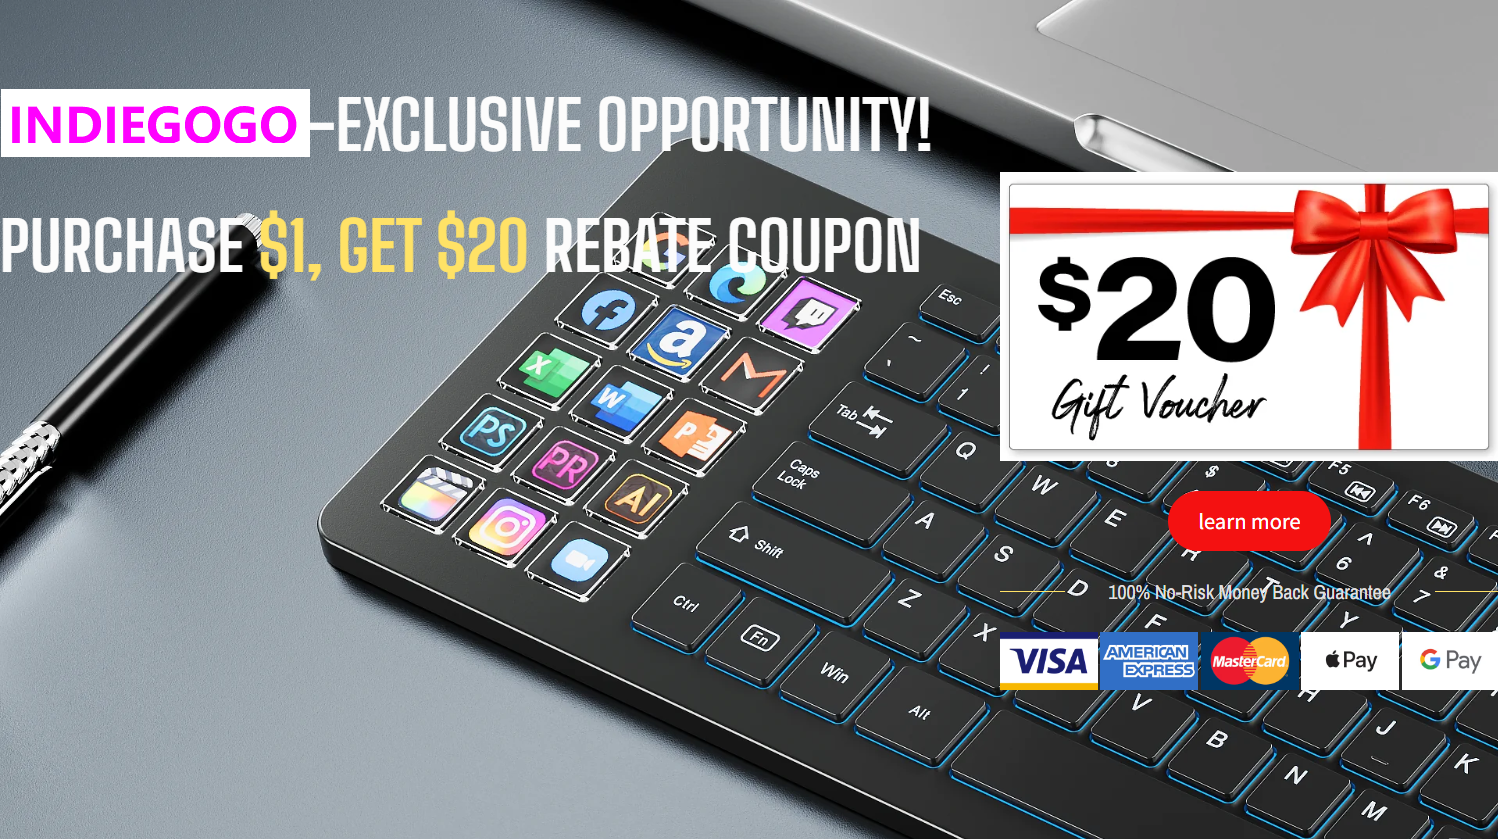 Indiegogo-Exclusive Opportunity! Purchase $1, Get $20 Rebate Coupon